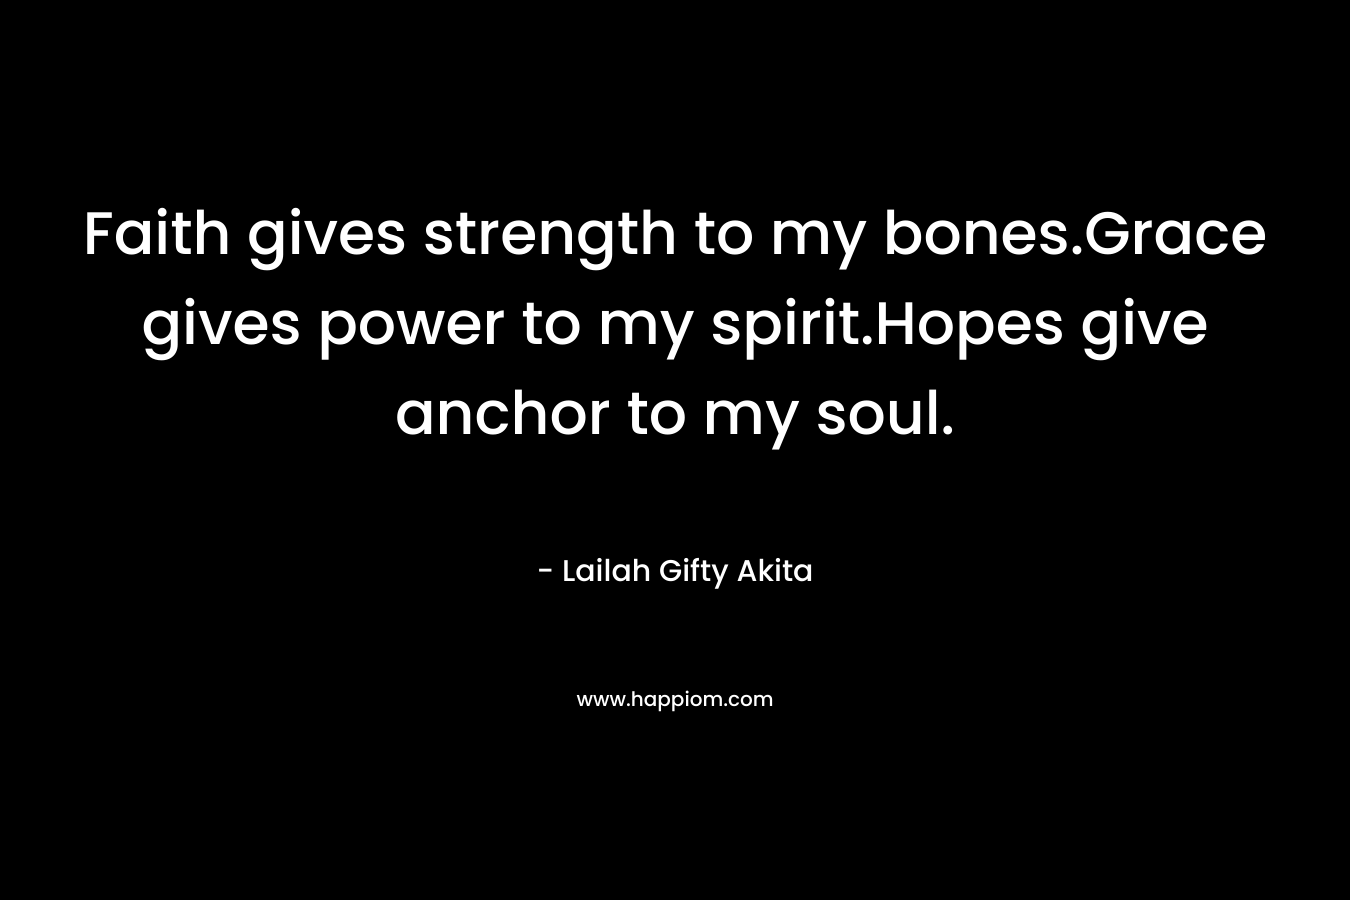 Faith gives strength to my bones.Grace gives power to my spirit.Hopes give anchor to my soul.